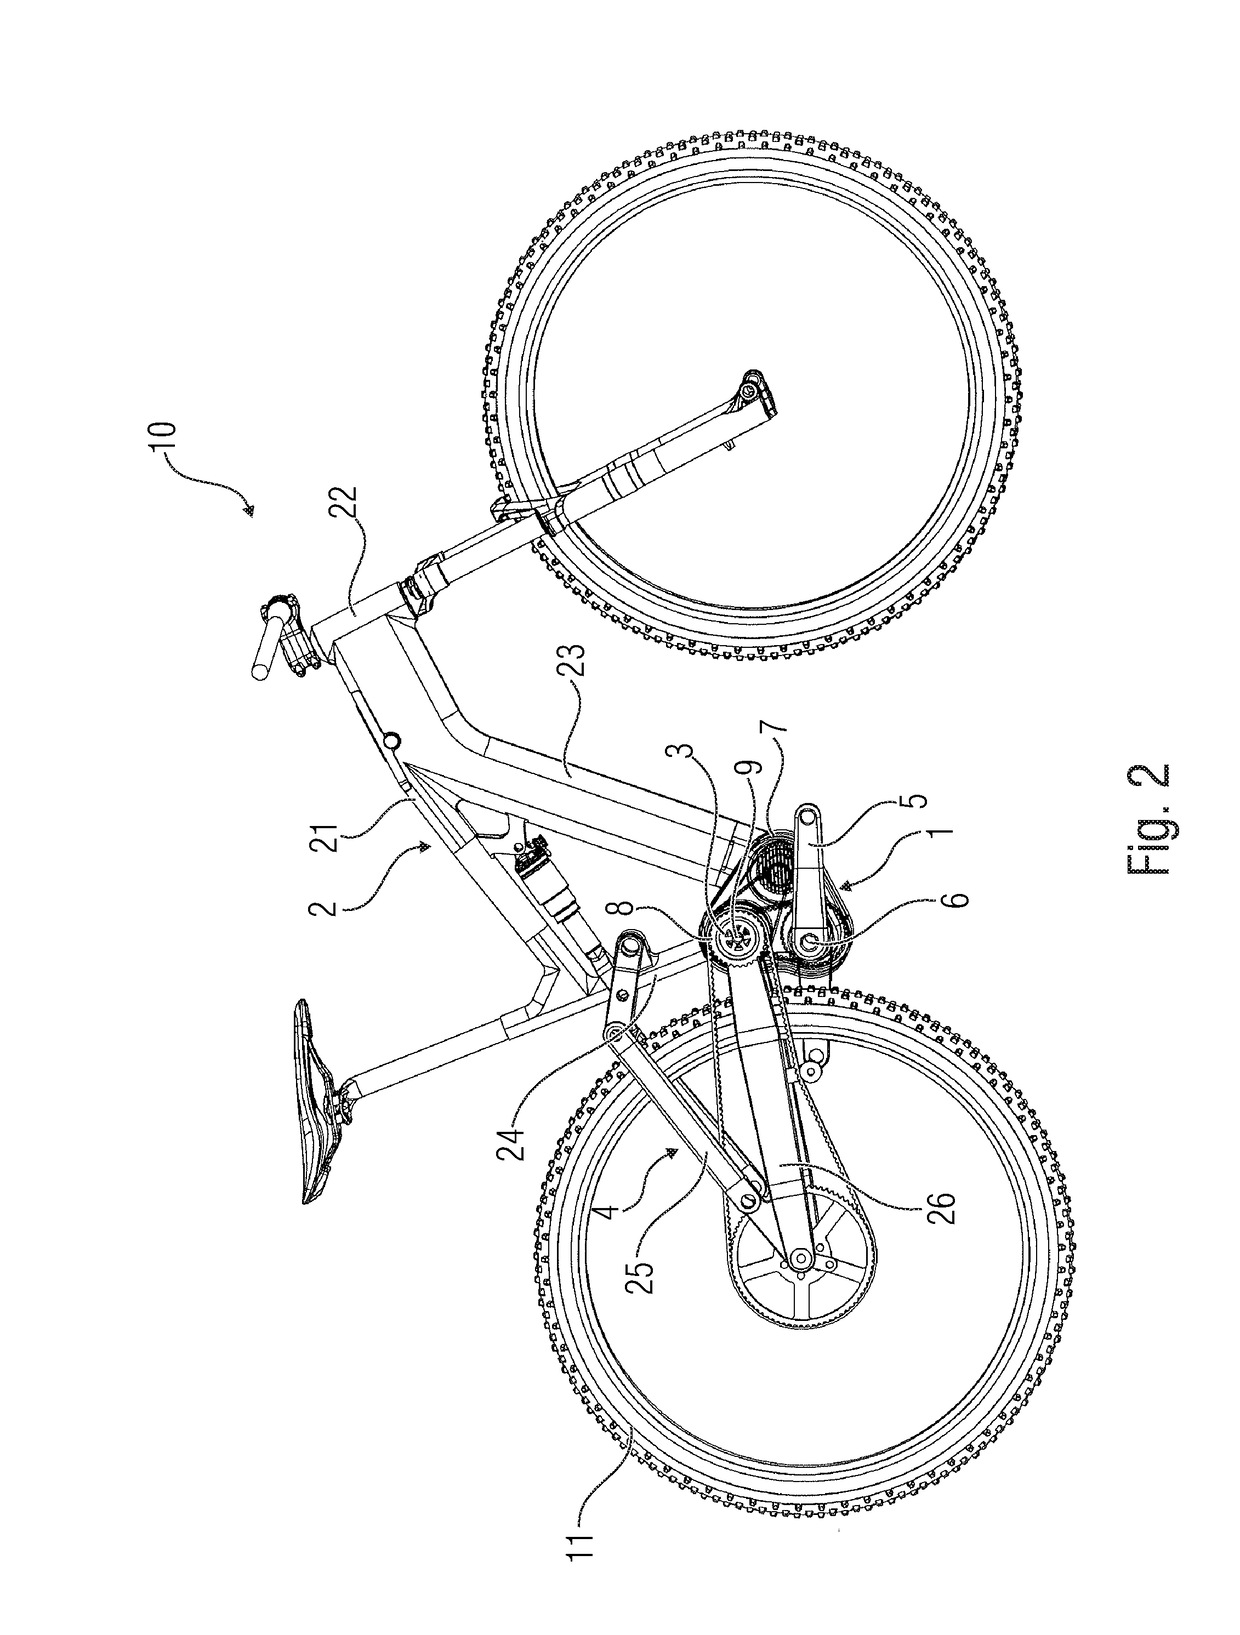 Drive device for a bicycle driven by an electric motor